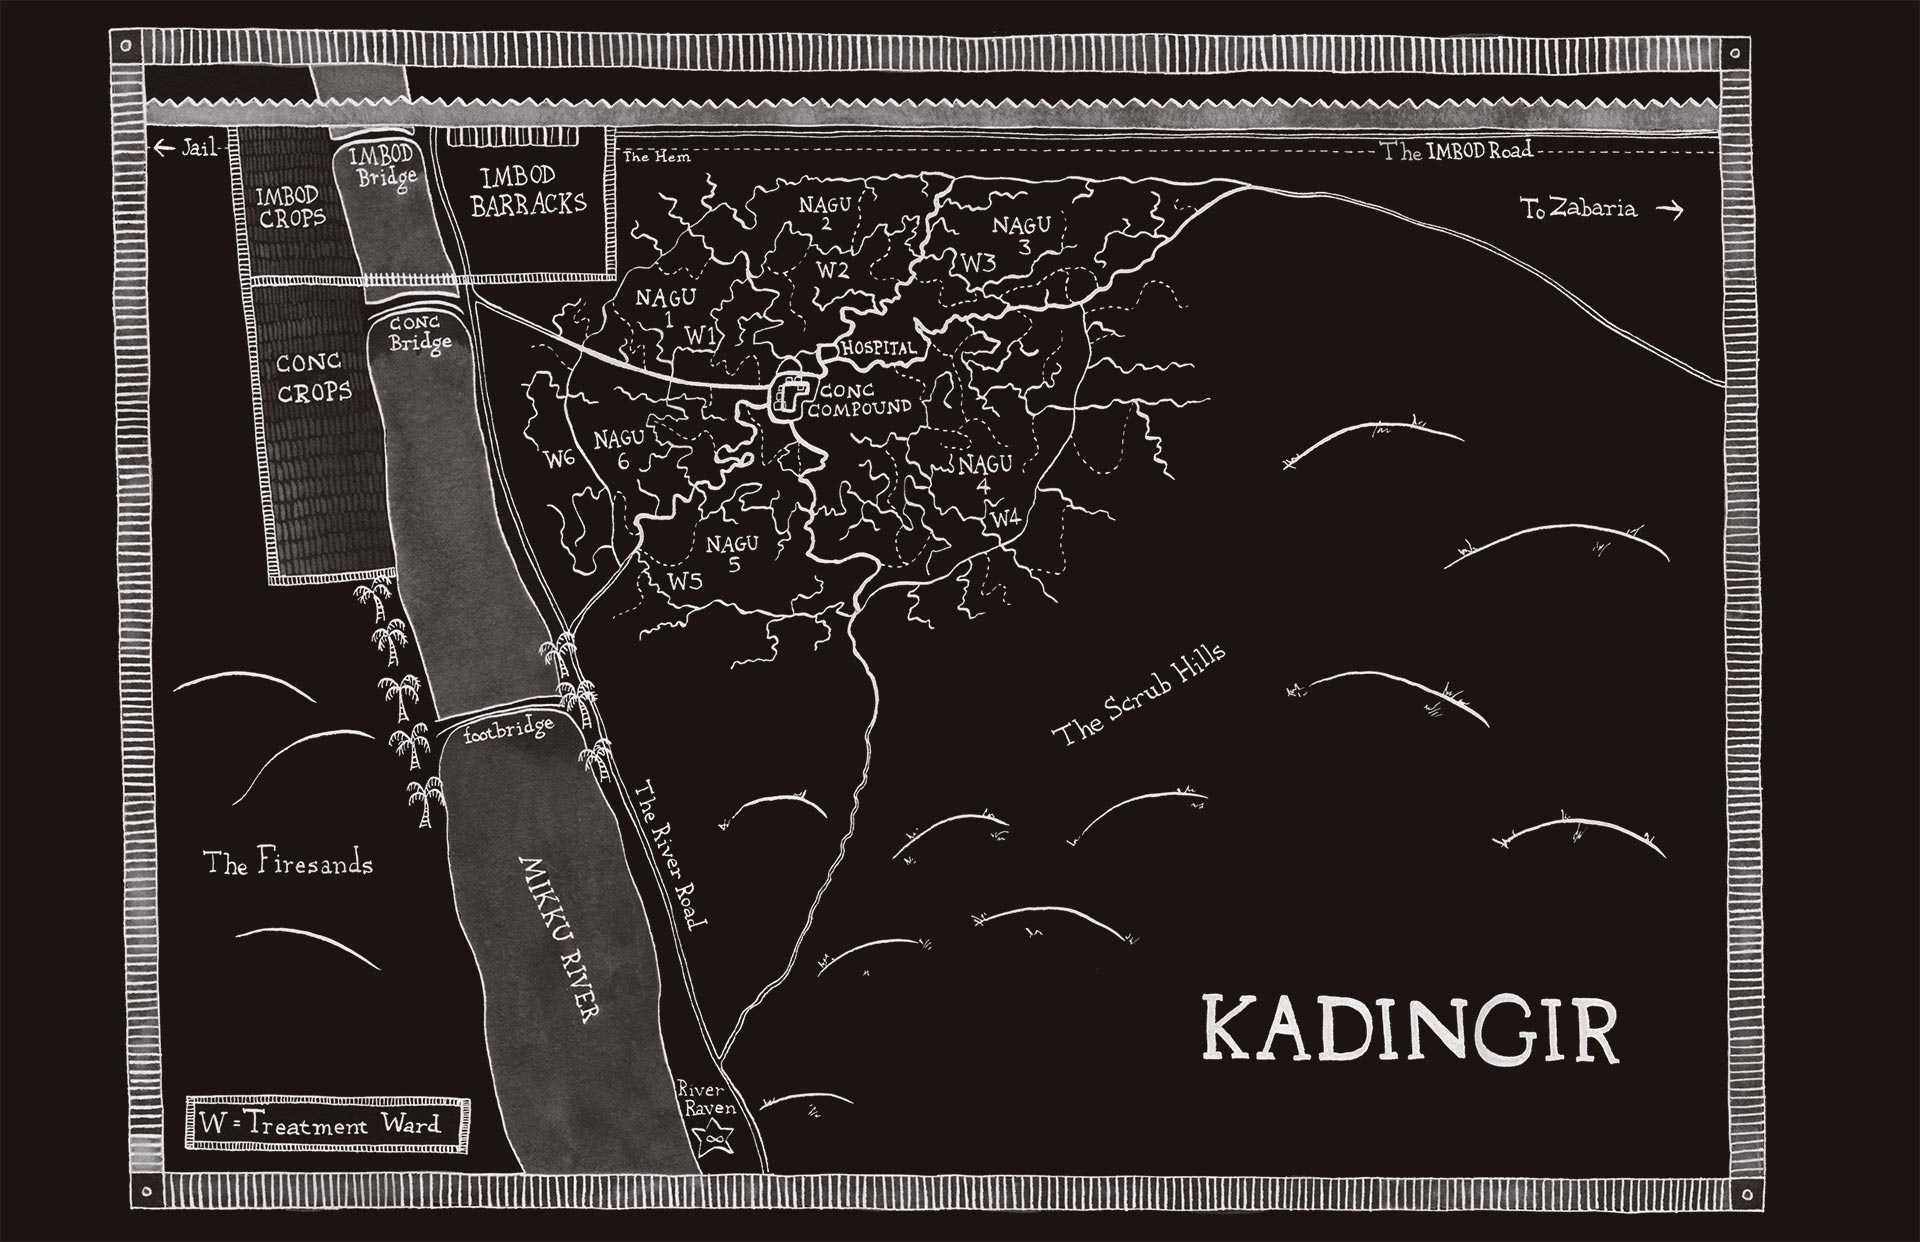 A hand-drawn map of Kadingir, the main refugee camp in Non-Land. Kadingir is a sprawling tent city on the east bank of the Mikku river and south of the Is-Land Boundary Wall. The river flows under the wall into Is-Land, and is guarded at this point by the IMBOD barracks, the heavily fortified headquarters of the Is-Land Ministry of Boundary Defence. South of Kadingir lies the sparsely vegetated Scrub Hills, and to the east lies the mining town of Zabaria, also controlled by IMBOD who operate a road along the so-called Hem of the Boundary Wall. - ©Morag Hood/Jo Fletcher Books